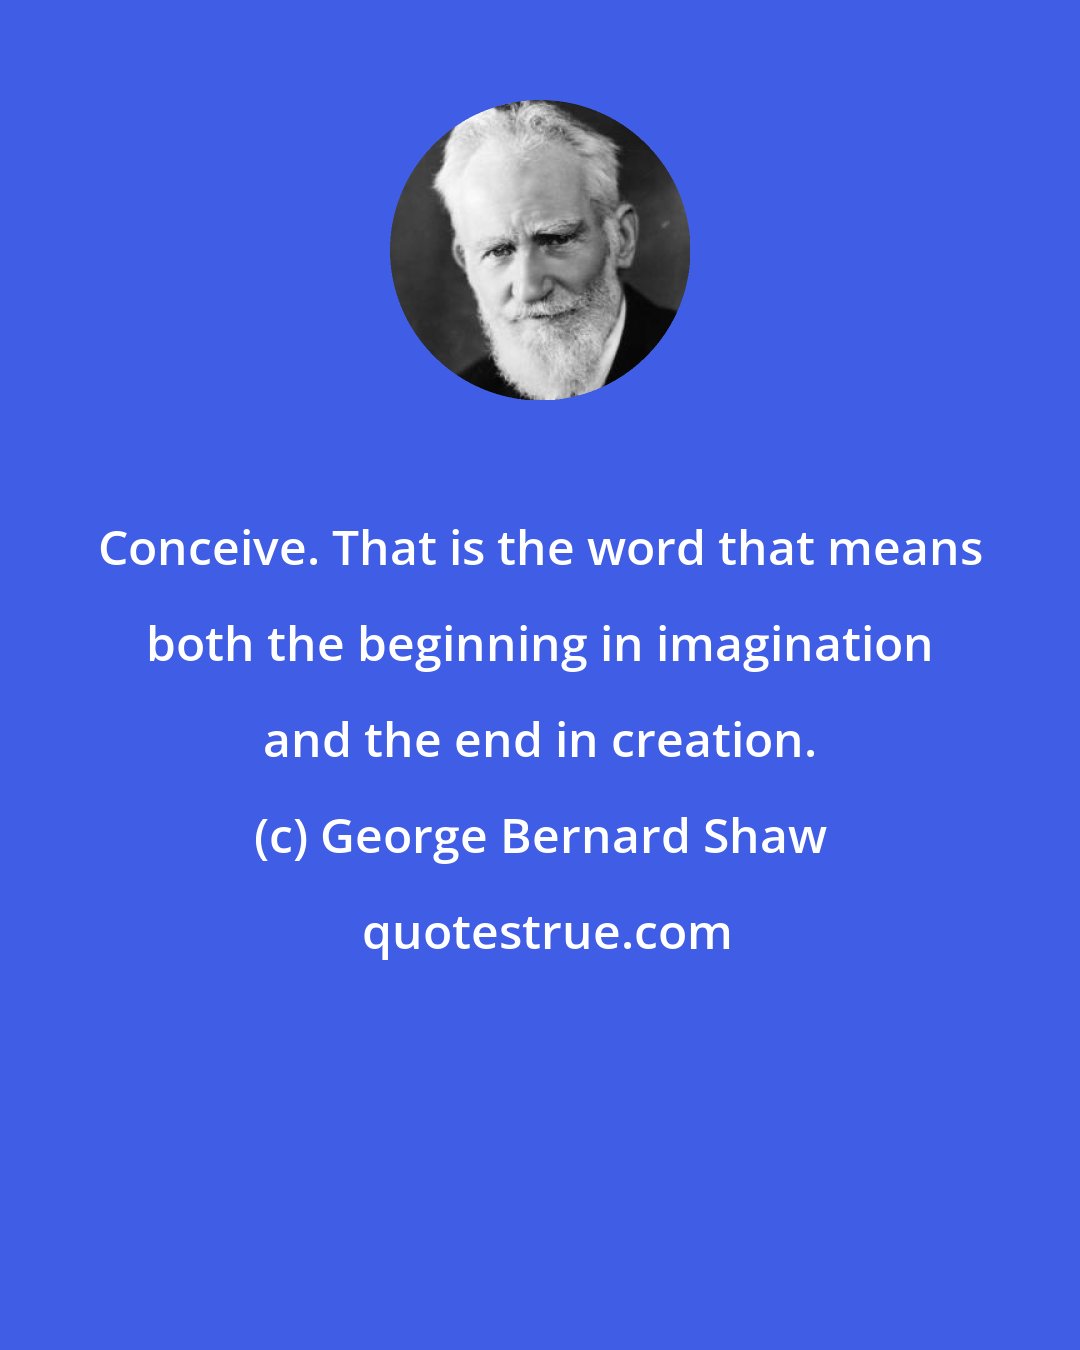 George Bernard Shaw: Conceive. That is the word that means both the beginning in imagination and the end in creation.